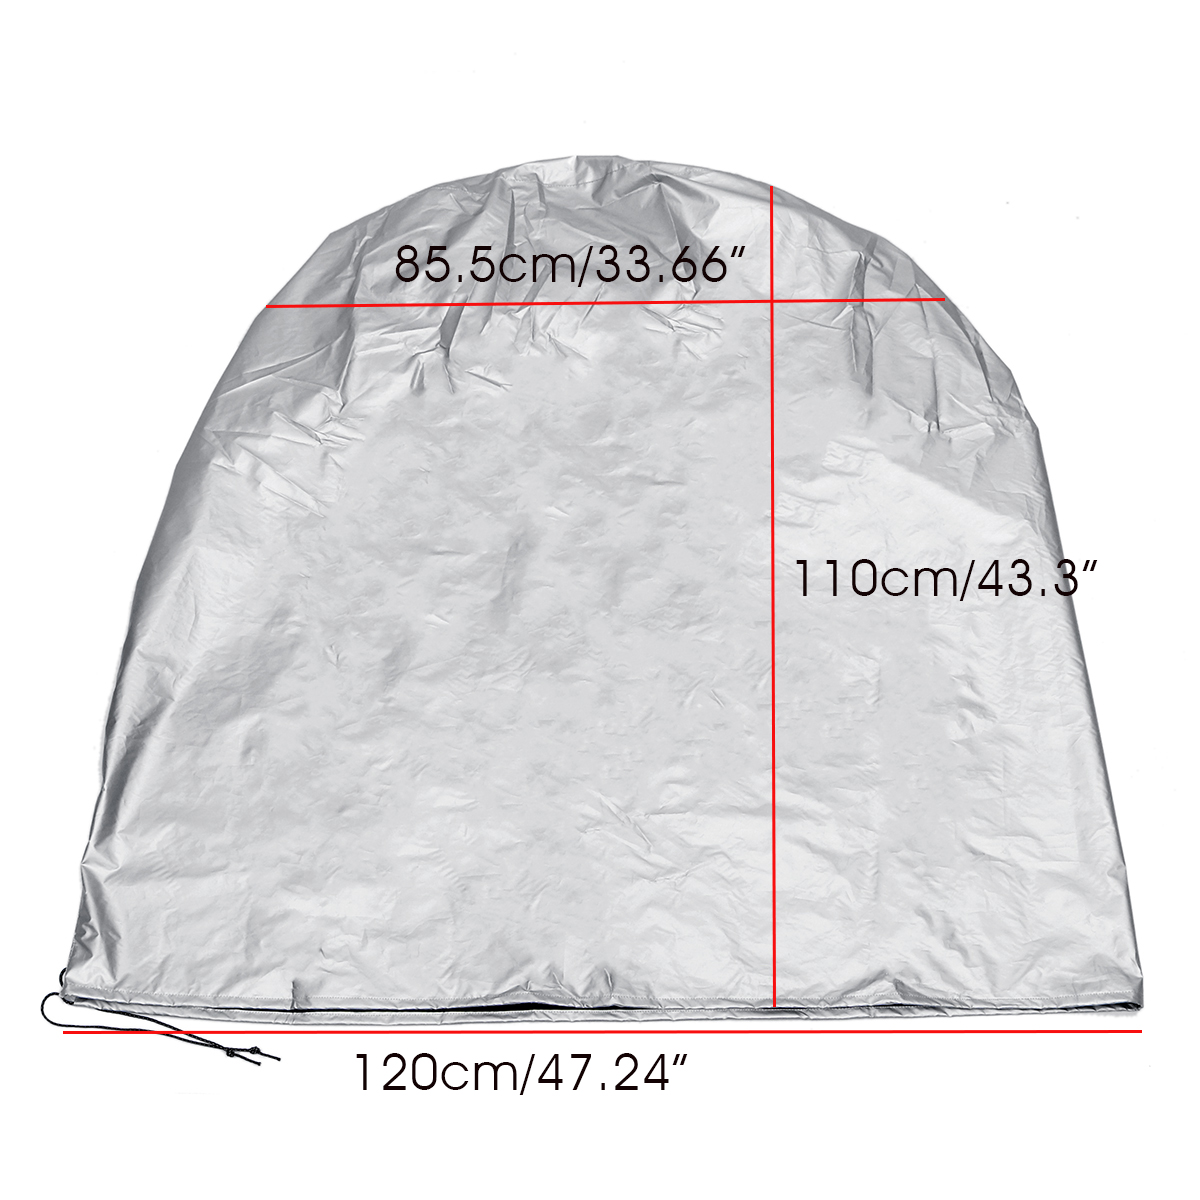 13-17quot-Diameter-Polyester-Car-Wheel-Tire-Cover-for-RV-Trailer-Camper-Car-Truck-Traile-1416637